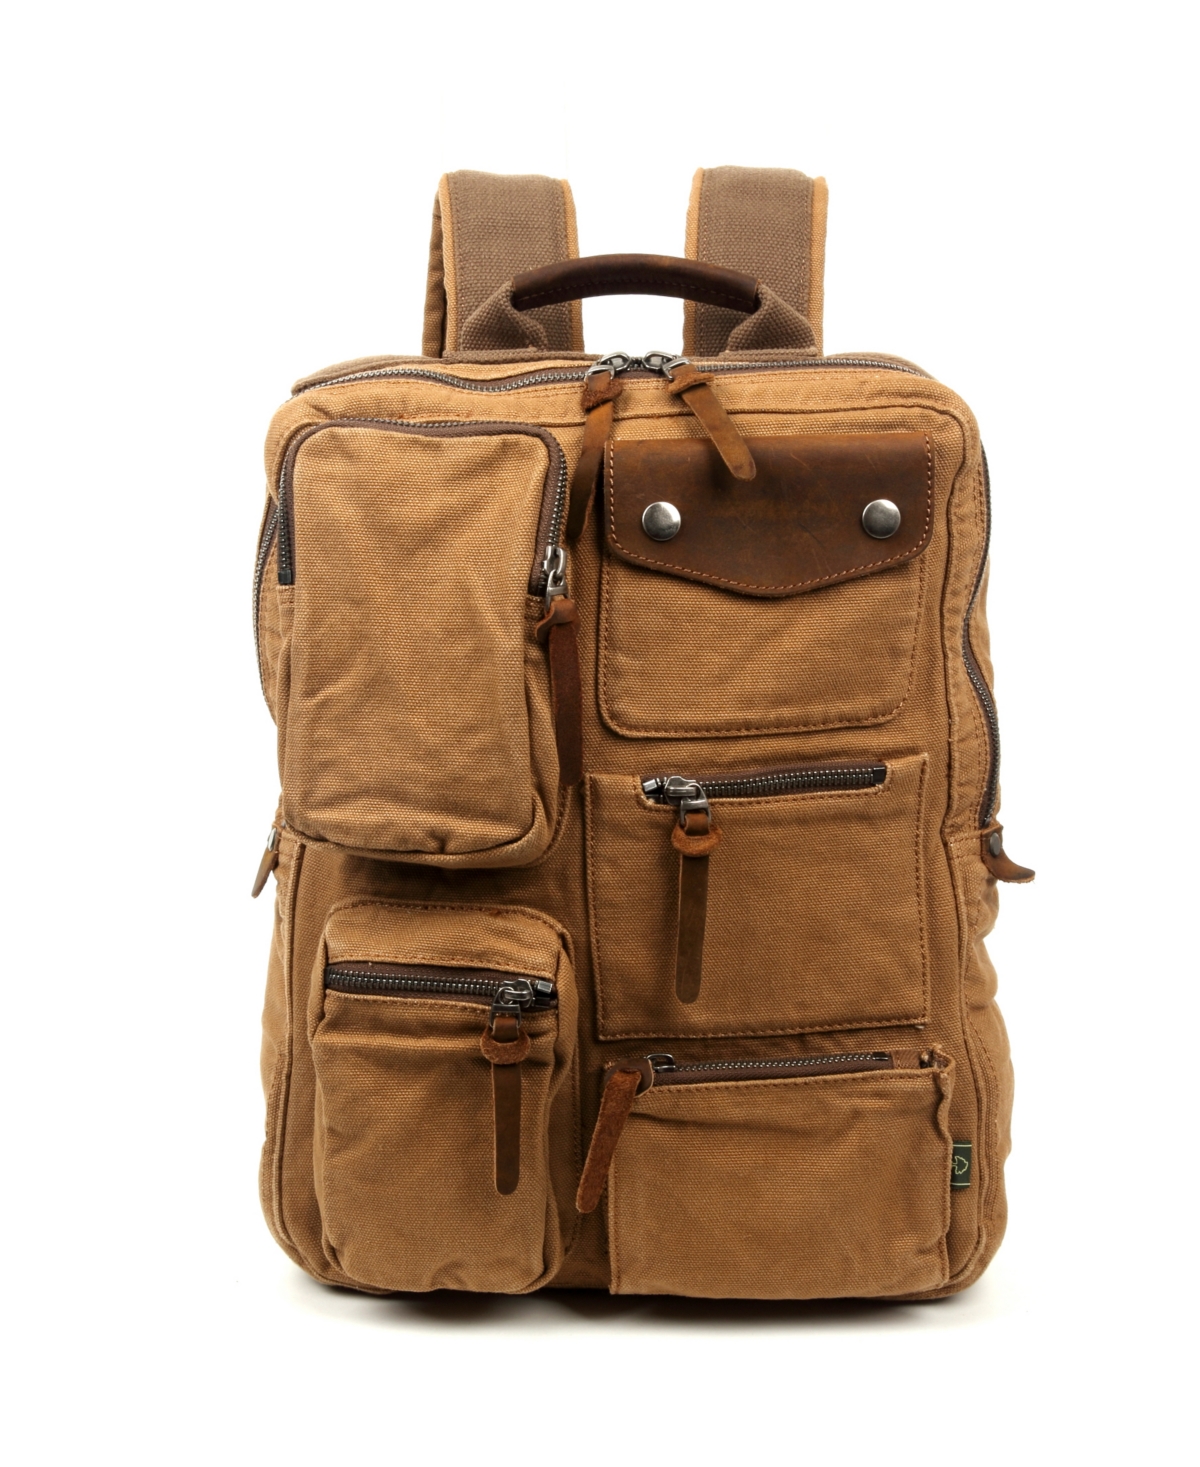 Ridge Valley Canvas Backpack - Camel